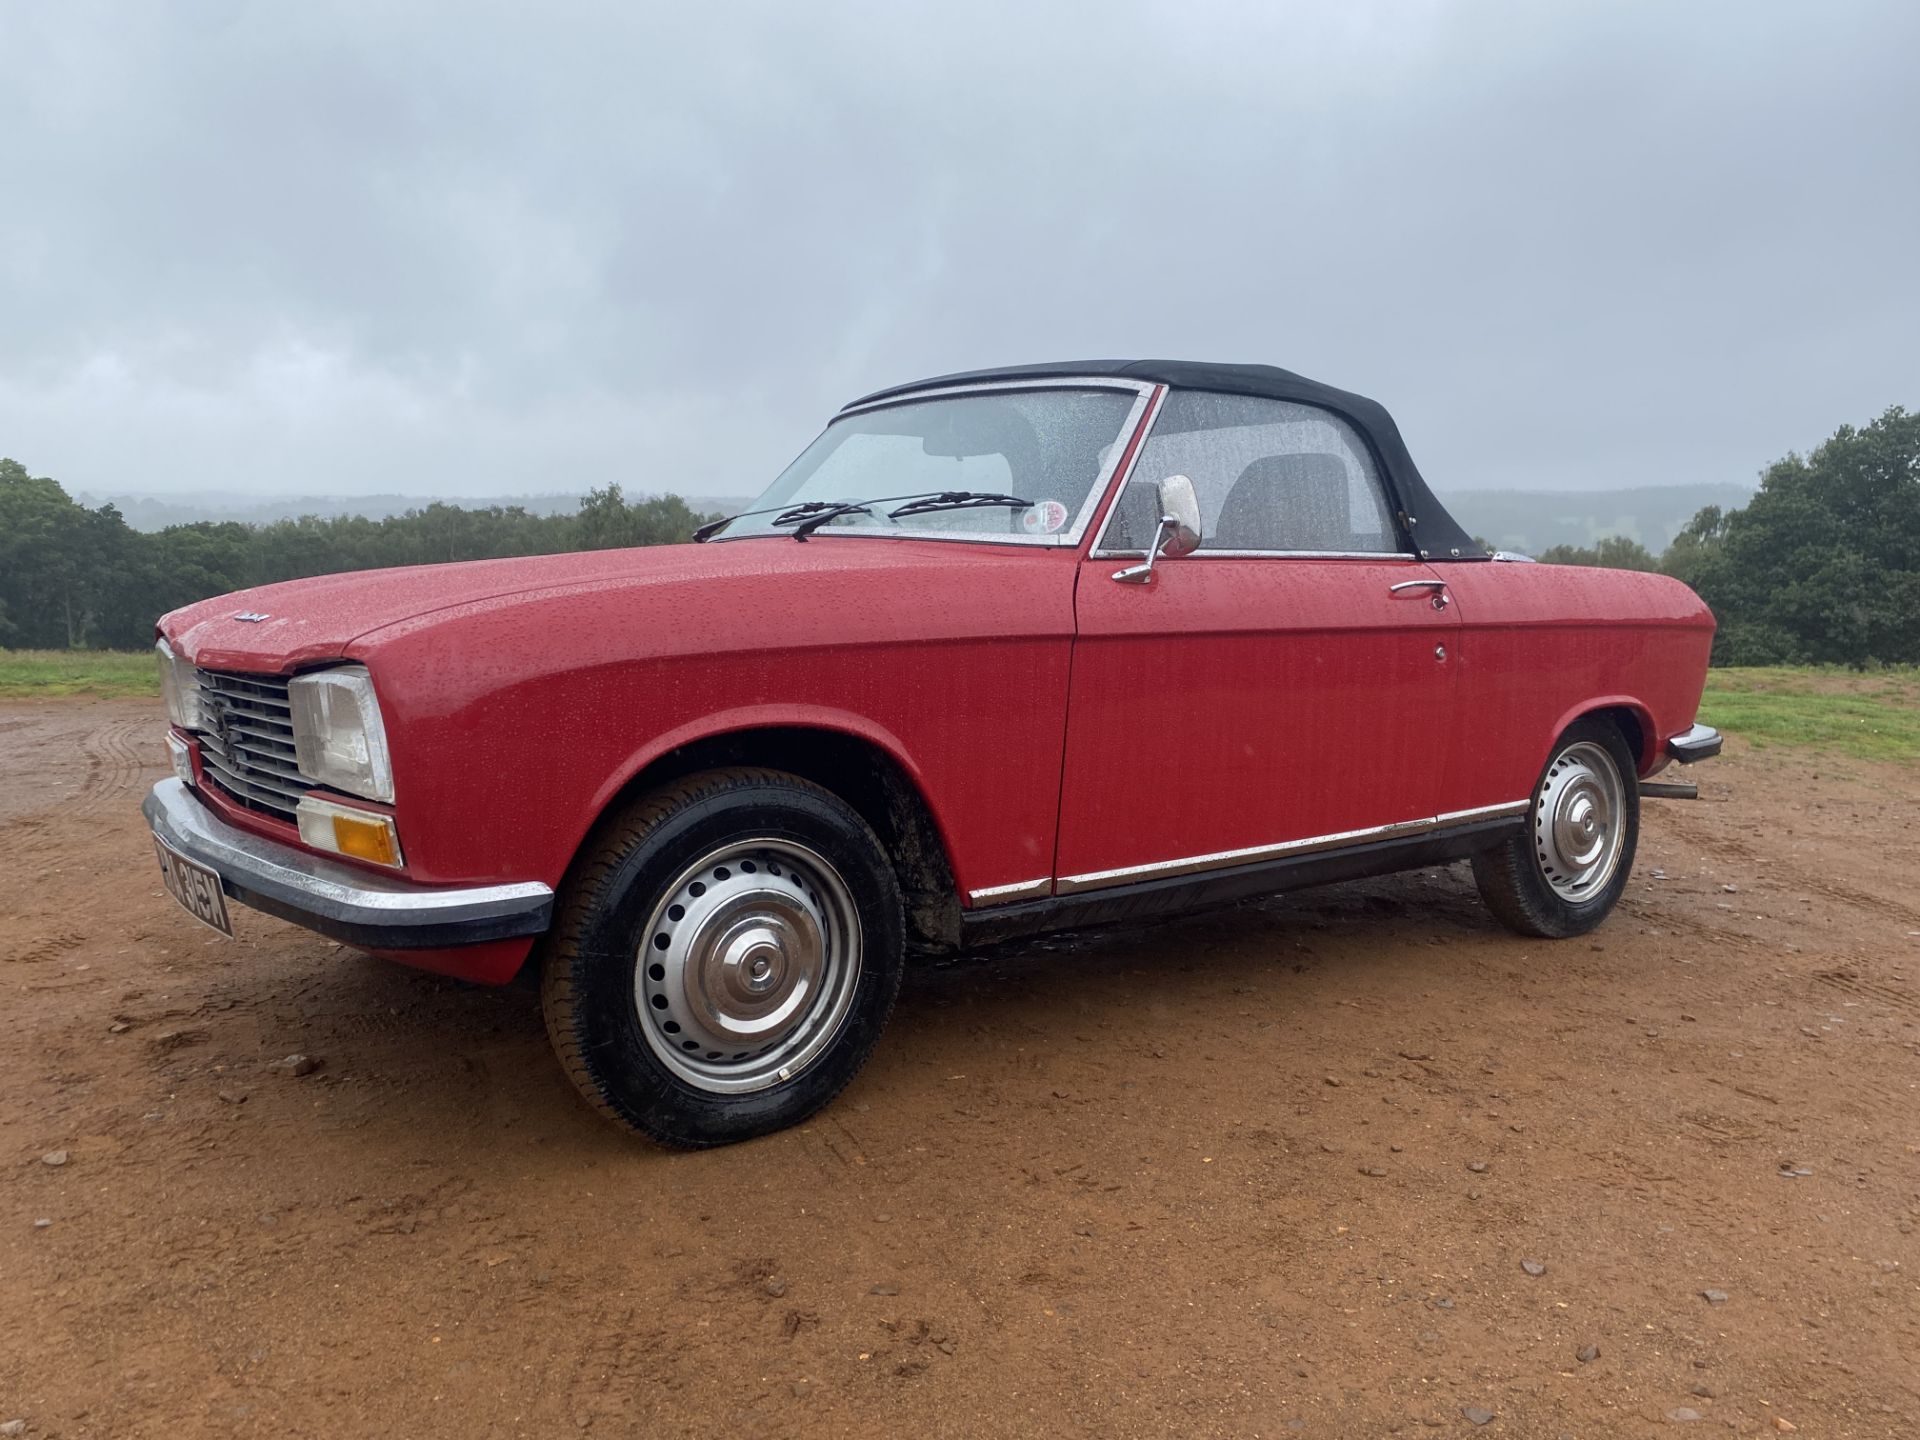 Peugeot 304 Convertible. Registration number: TPA 315M. Rare RHD drive model with 82,696 miles from - Image 7 of 14